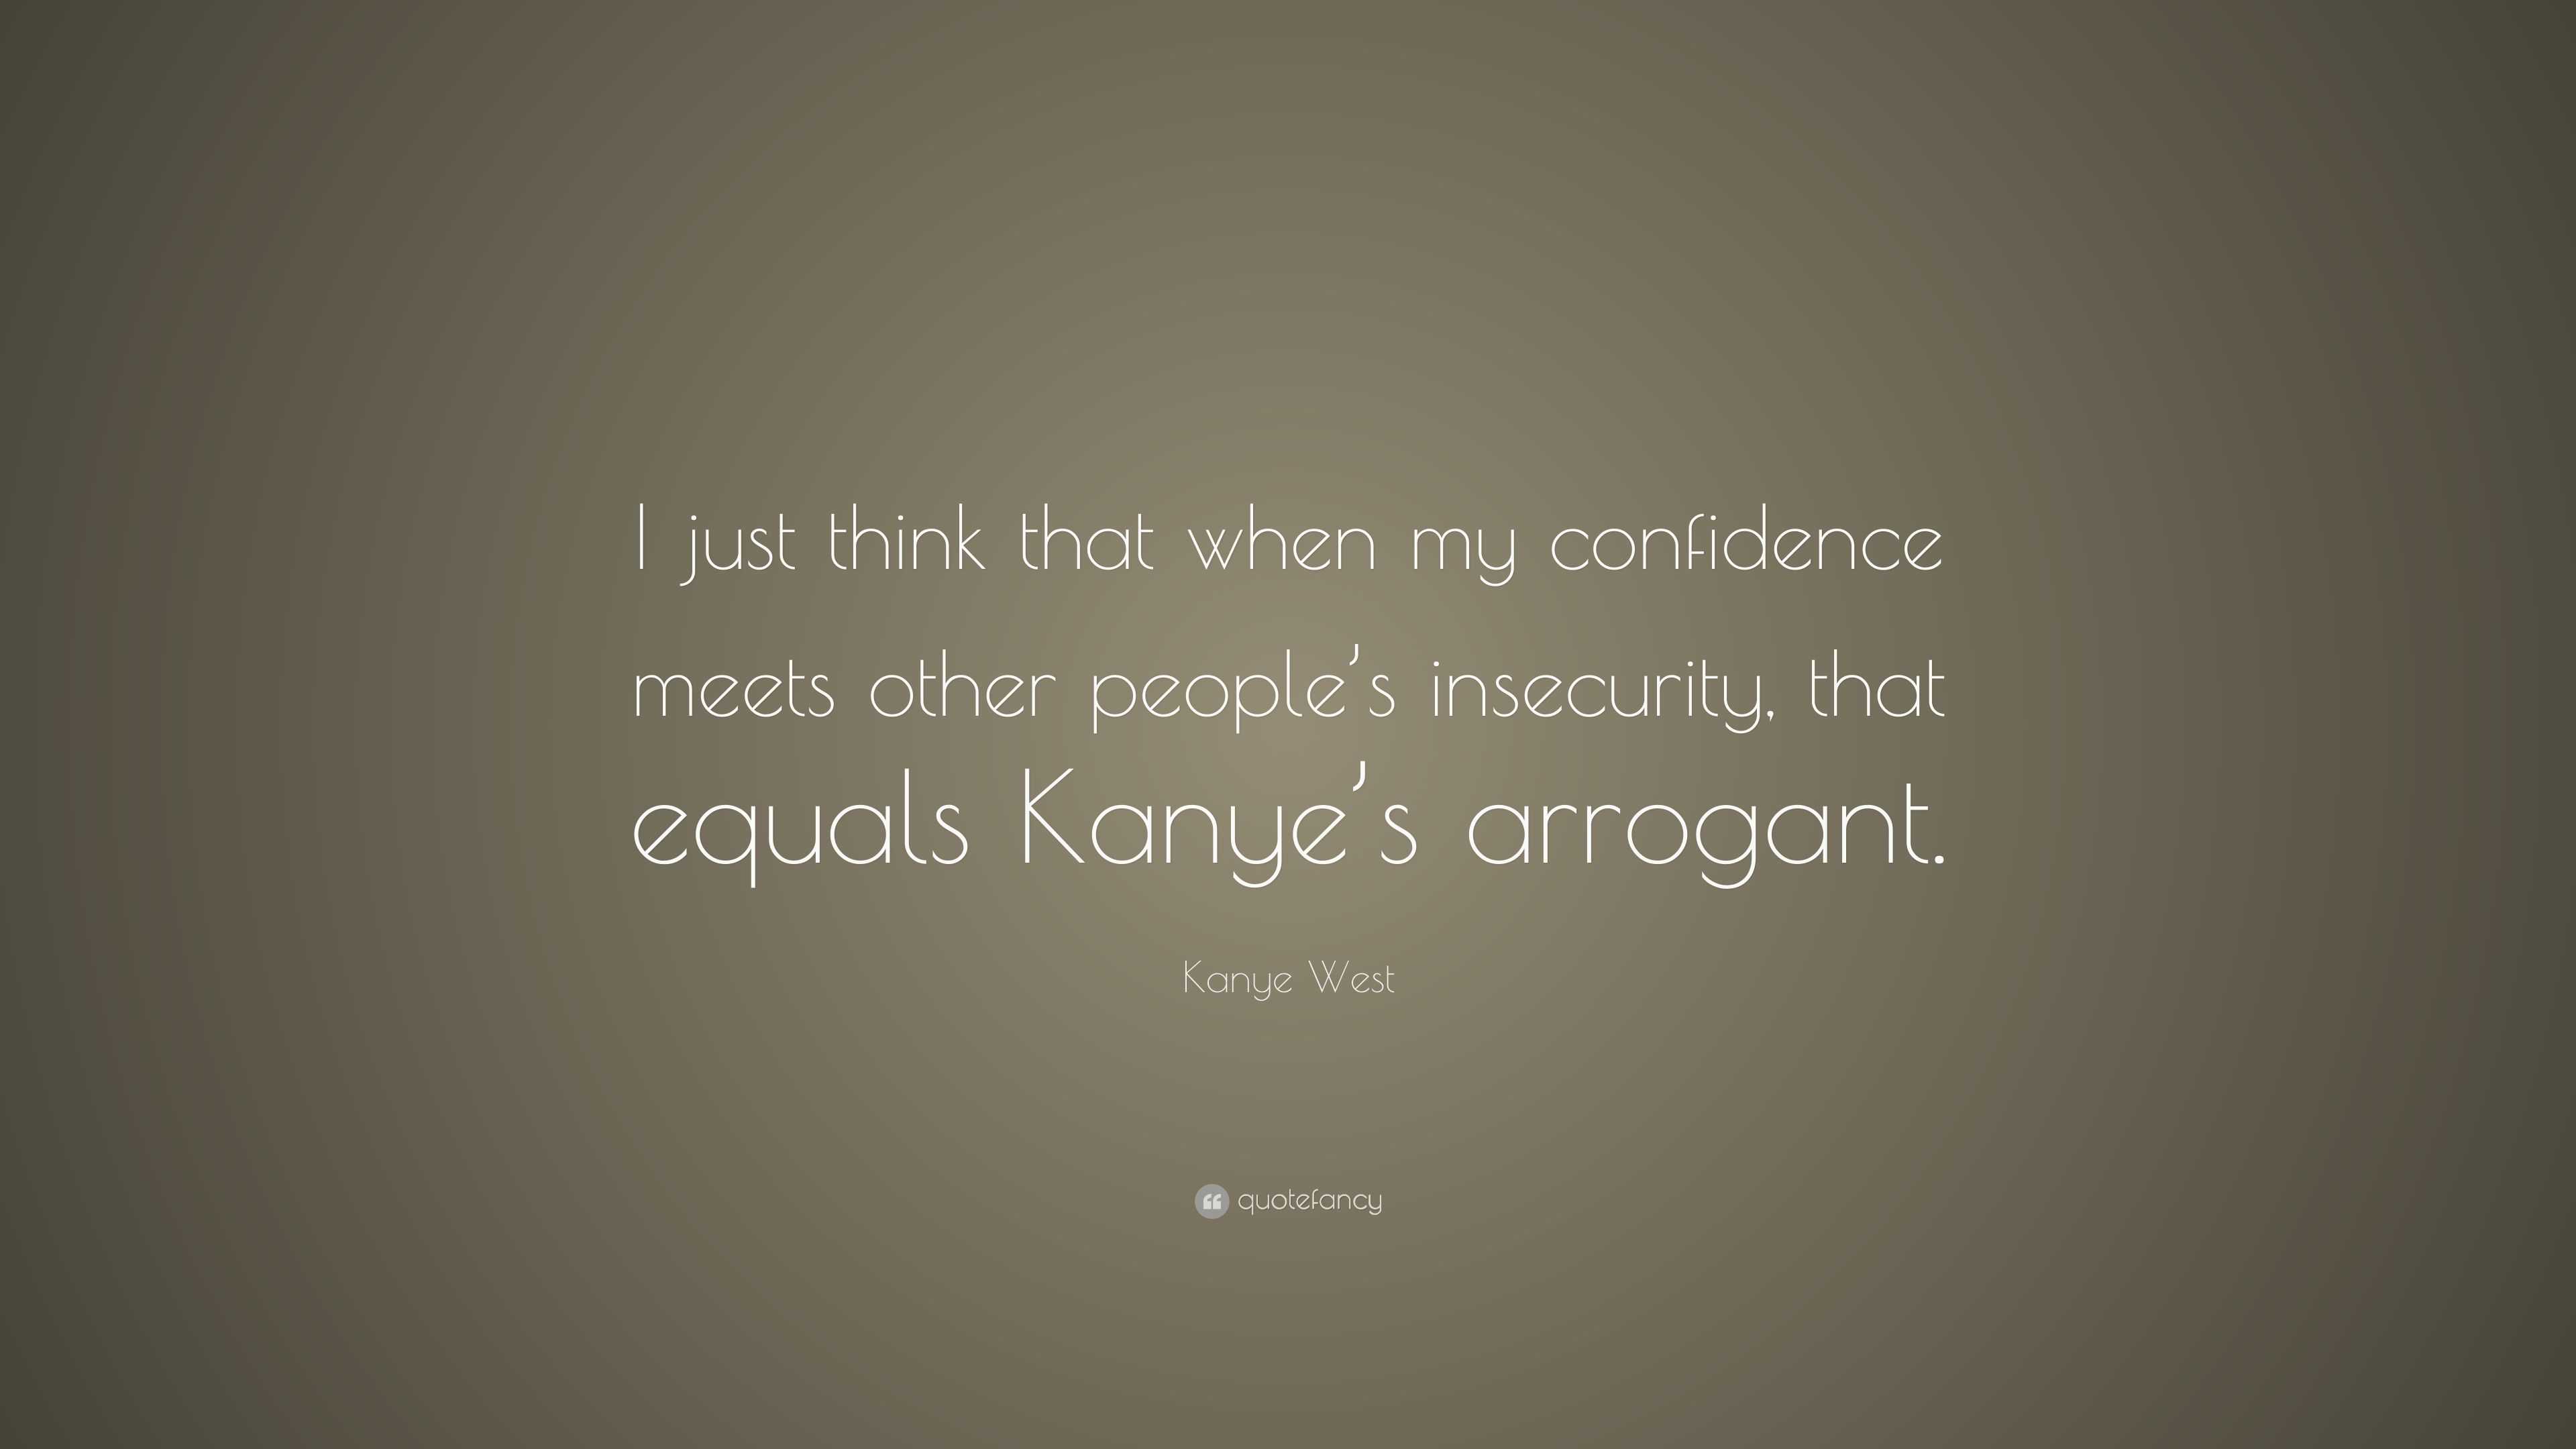 Kanye West Quote: “I just think that when my confidence meets ...